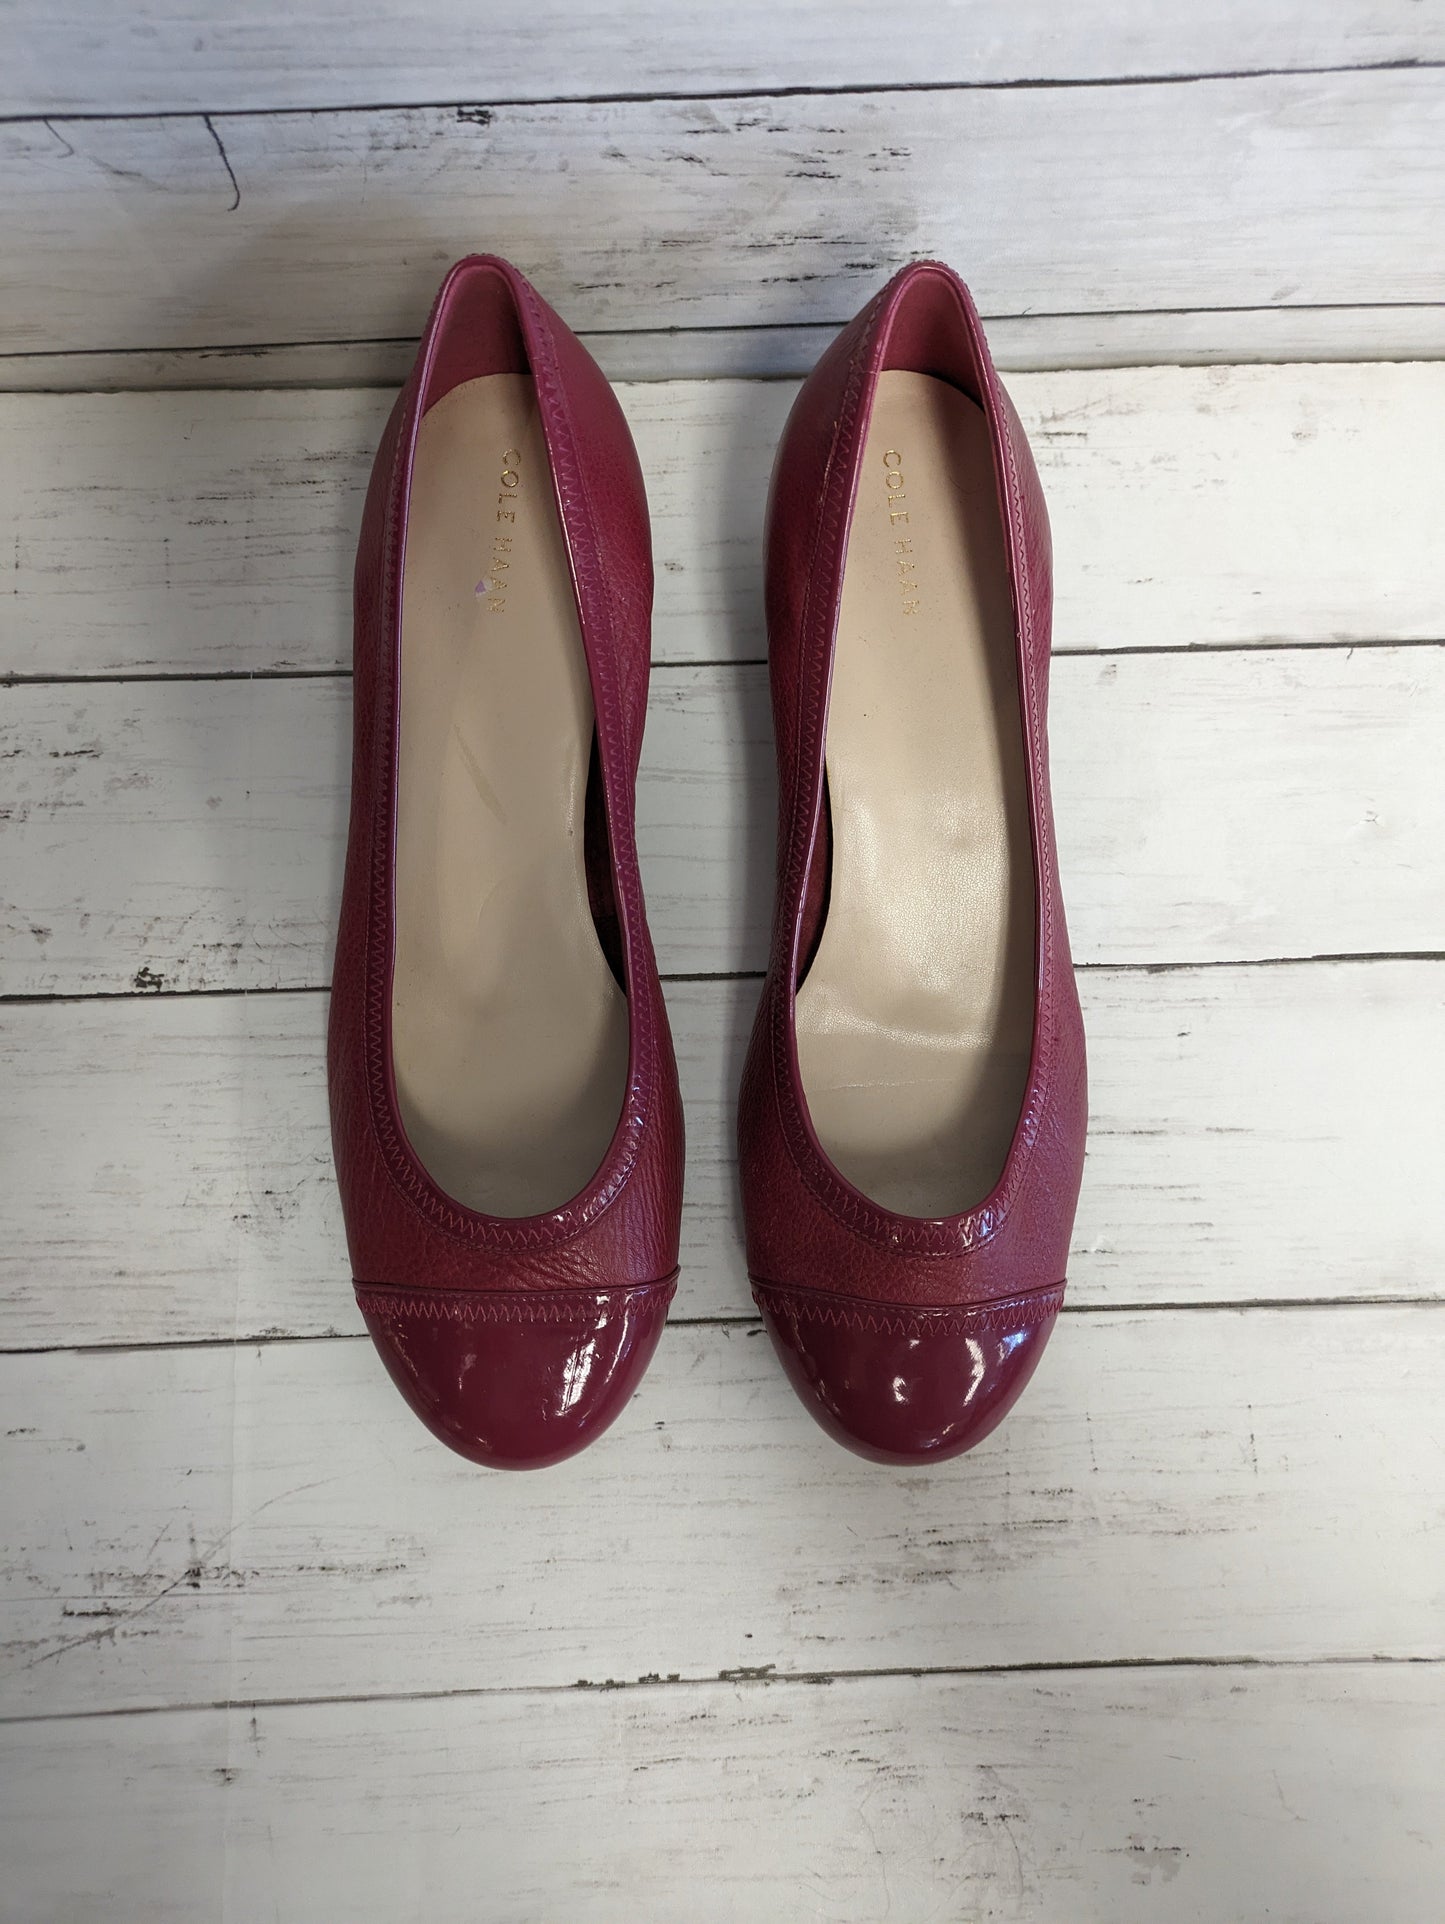 Shoes Flats Ballet By Cole-haan  Size: 11